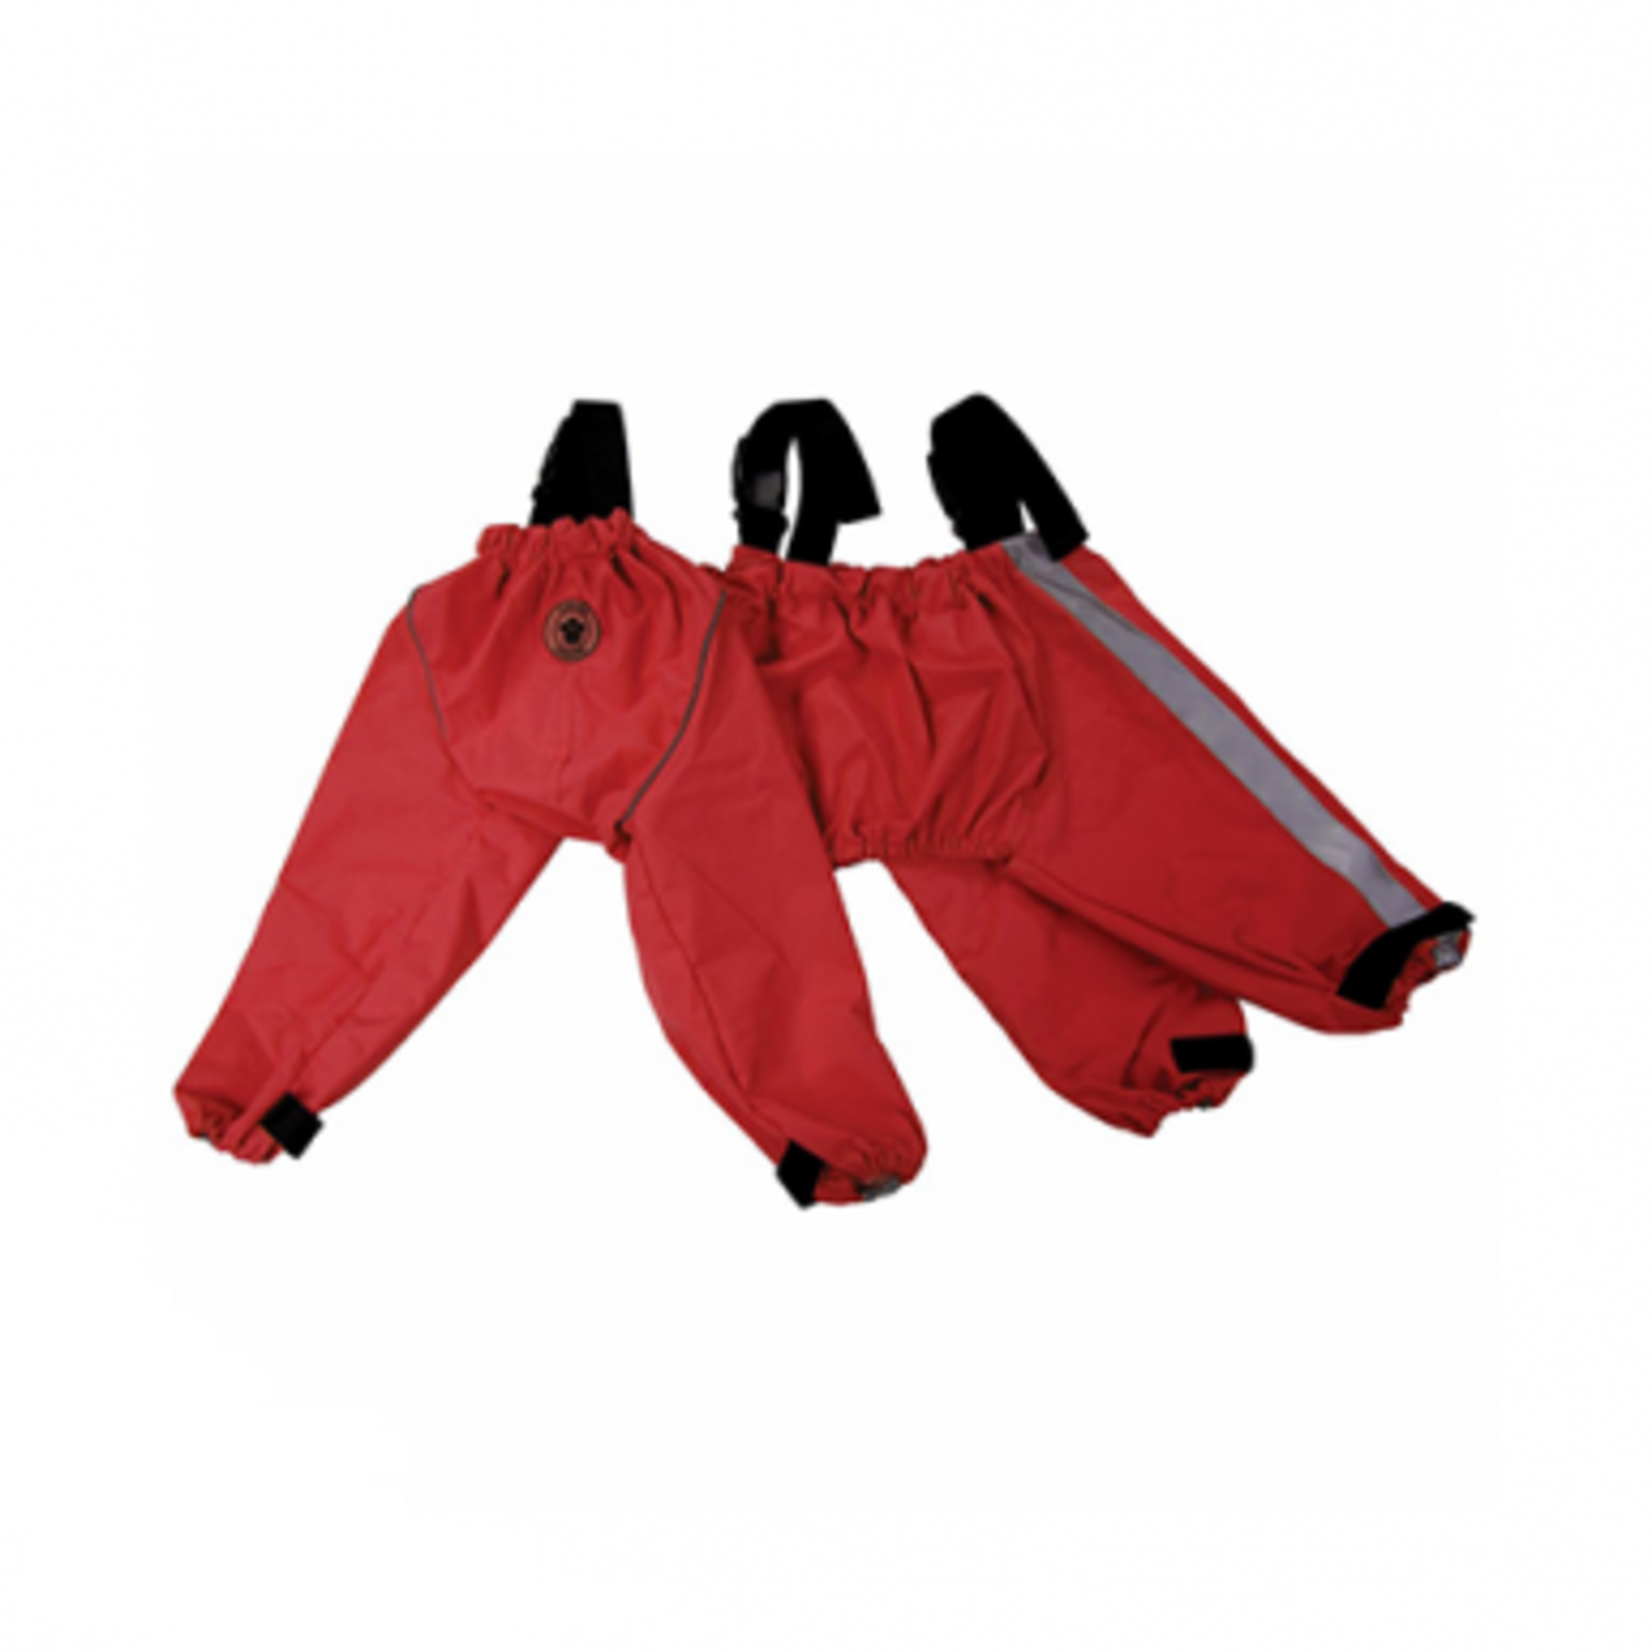 FouFou Brand Bodyguard Protective All-Weather Pants - RED - XLarge